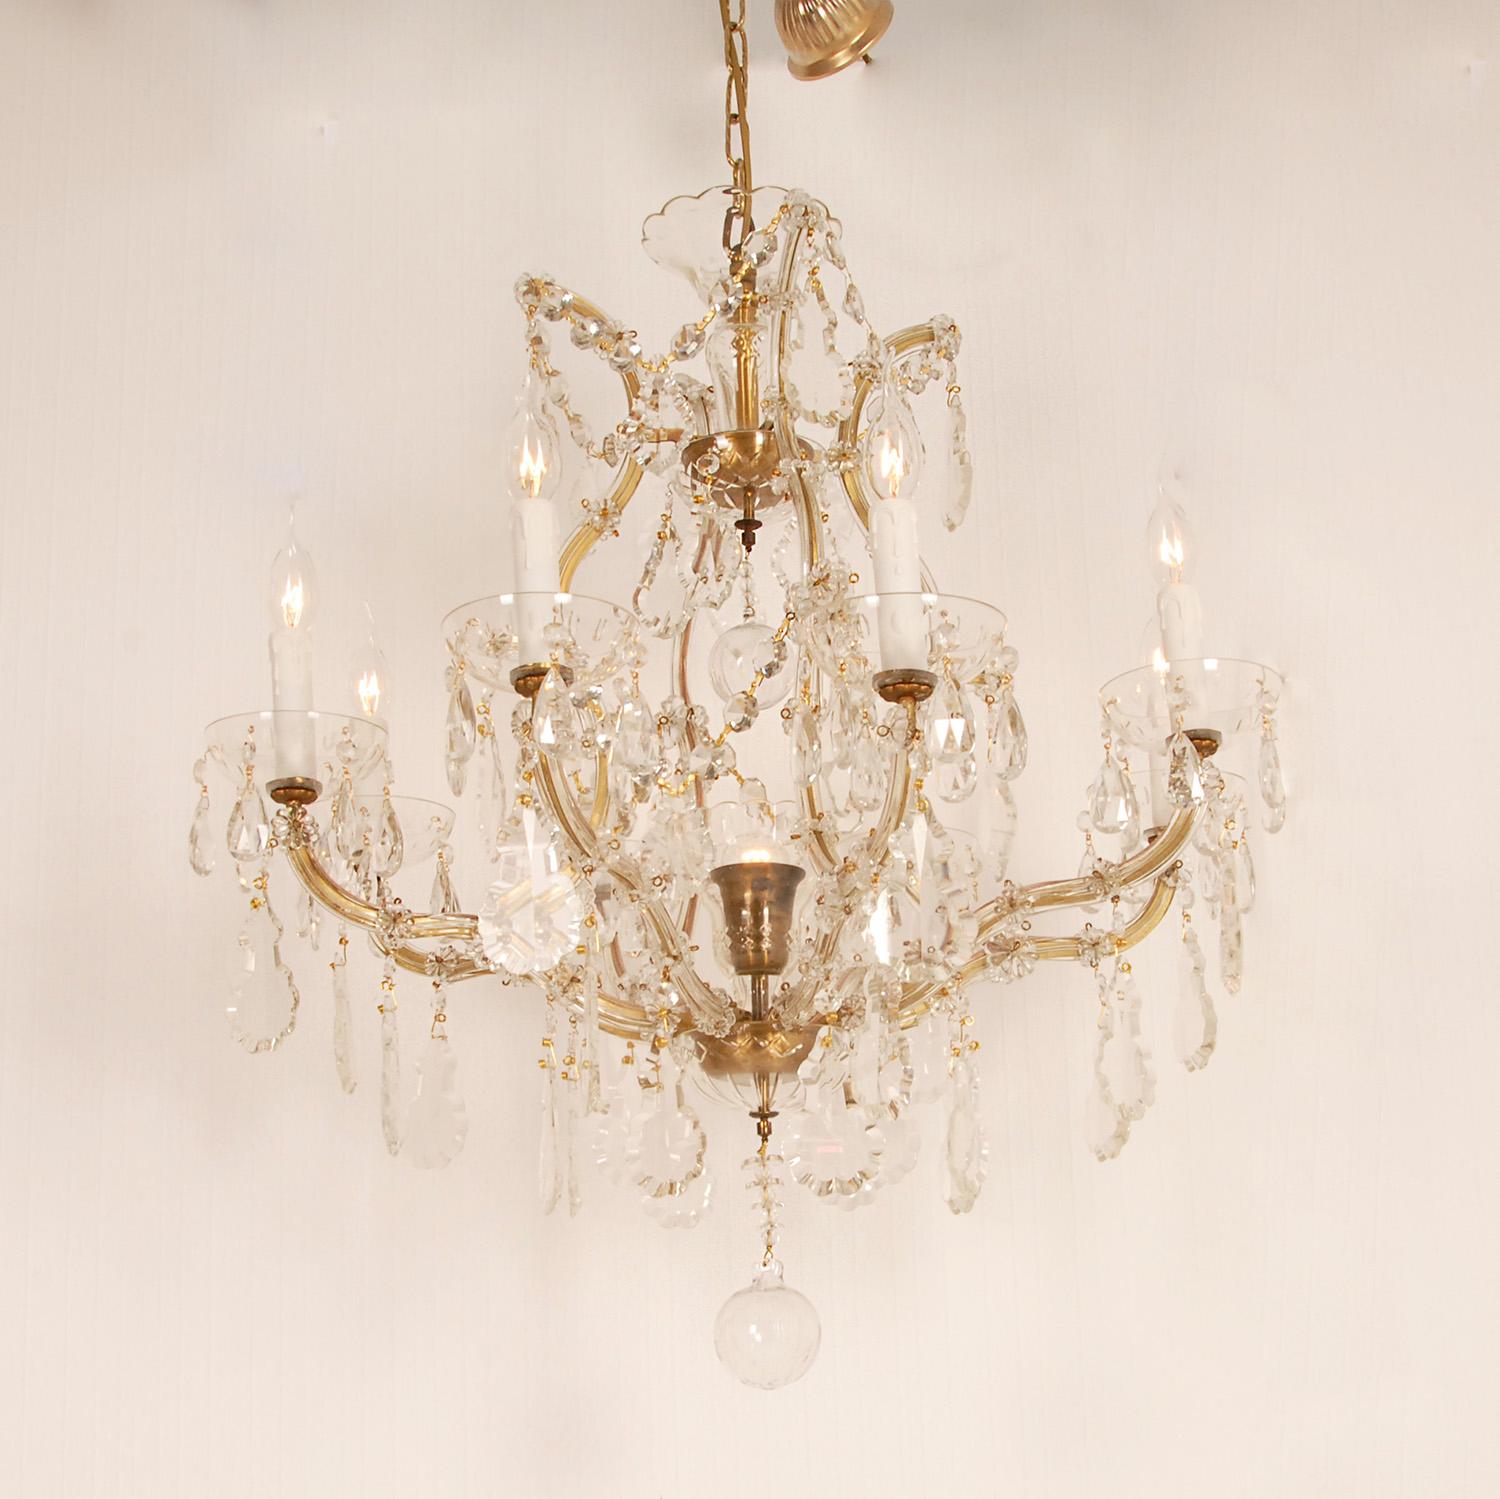 French Provincial Crystal Chandelier 9 Light Gold Frame Blown Glass Cage Chandelier Viennese